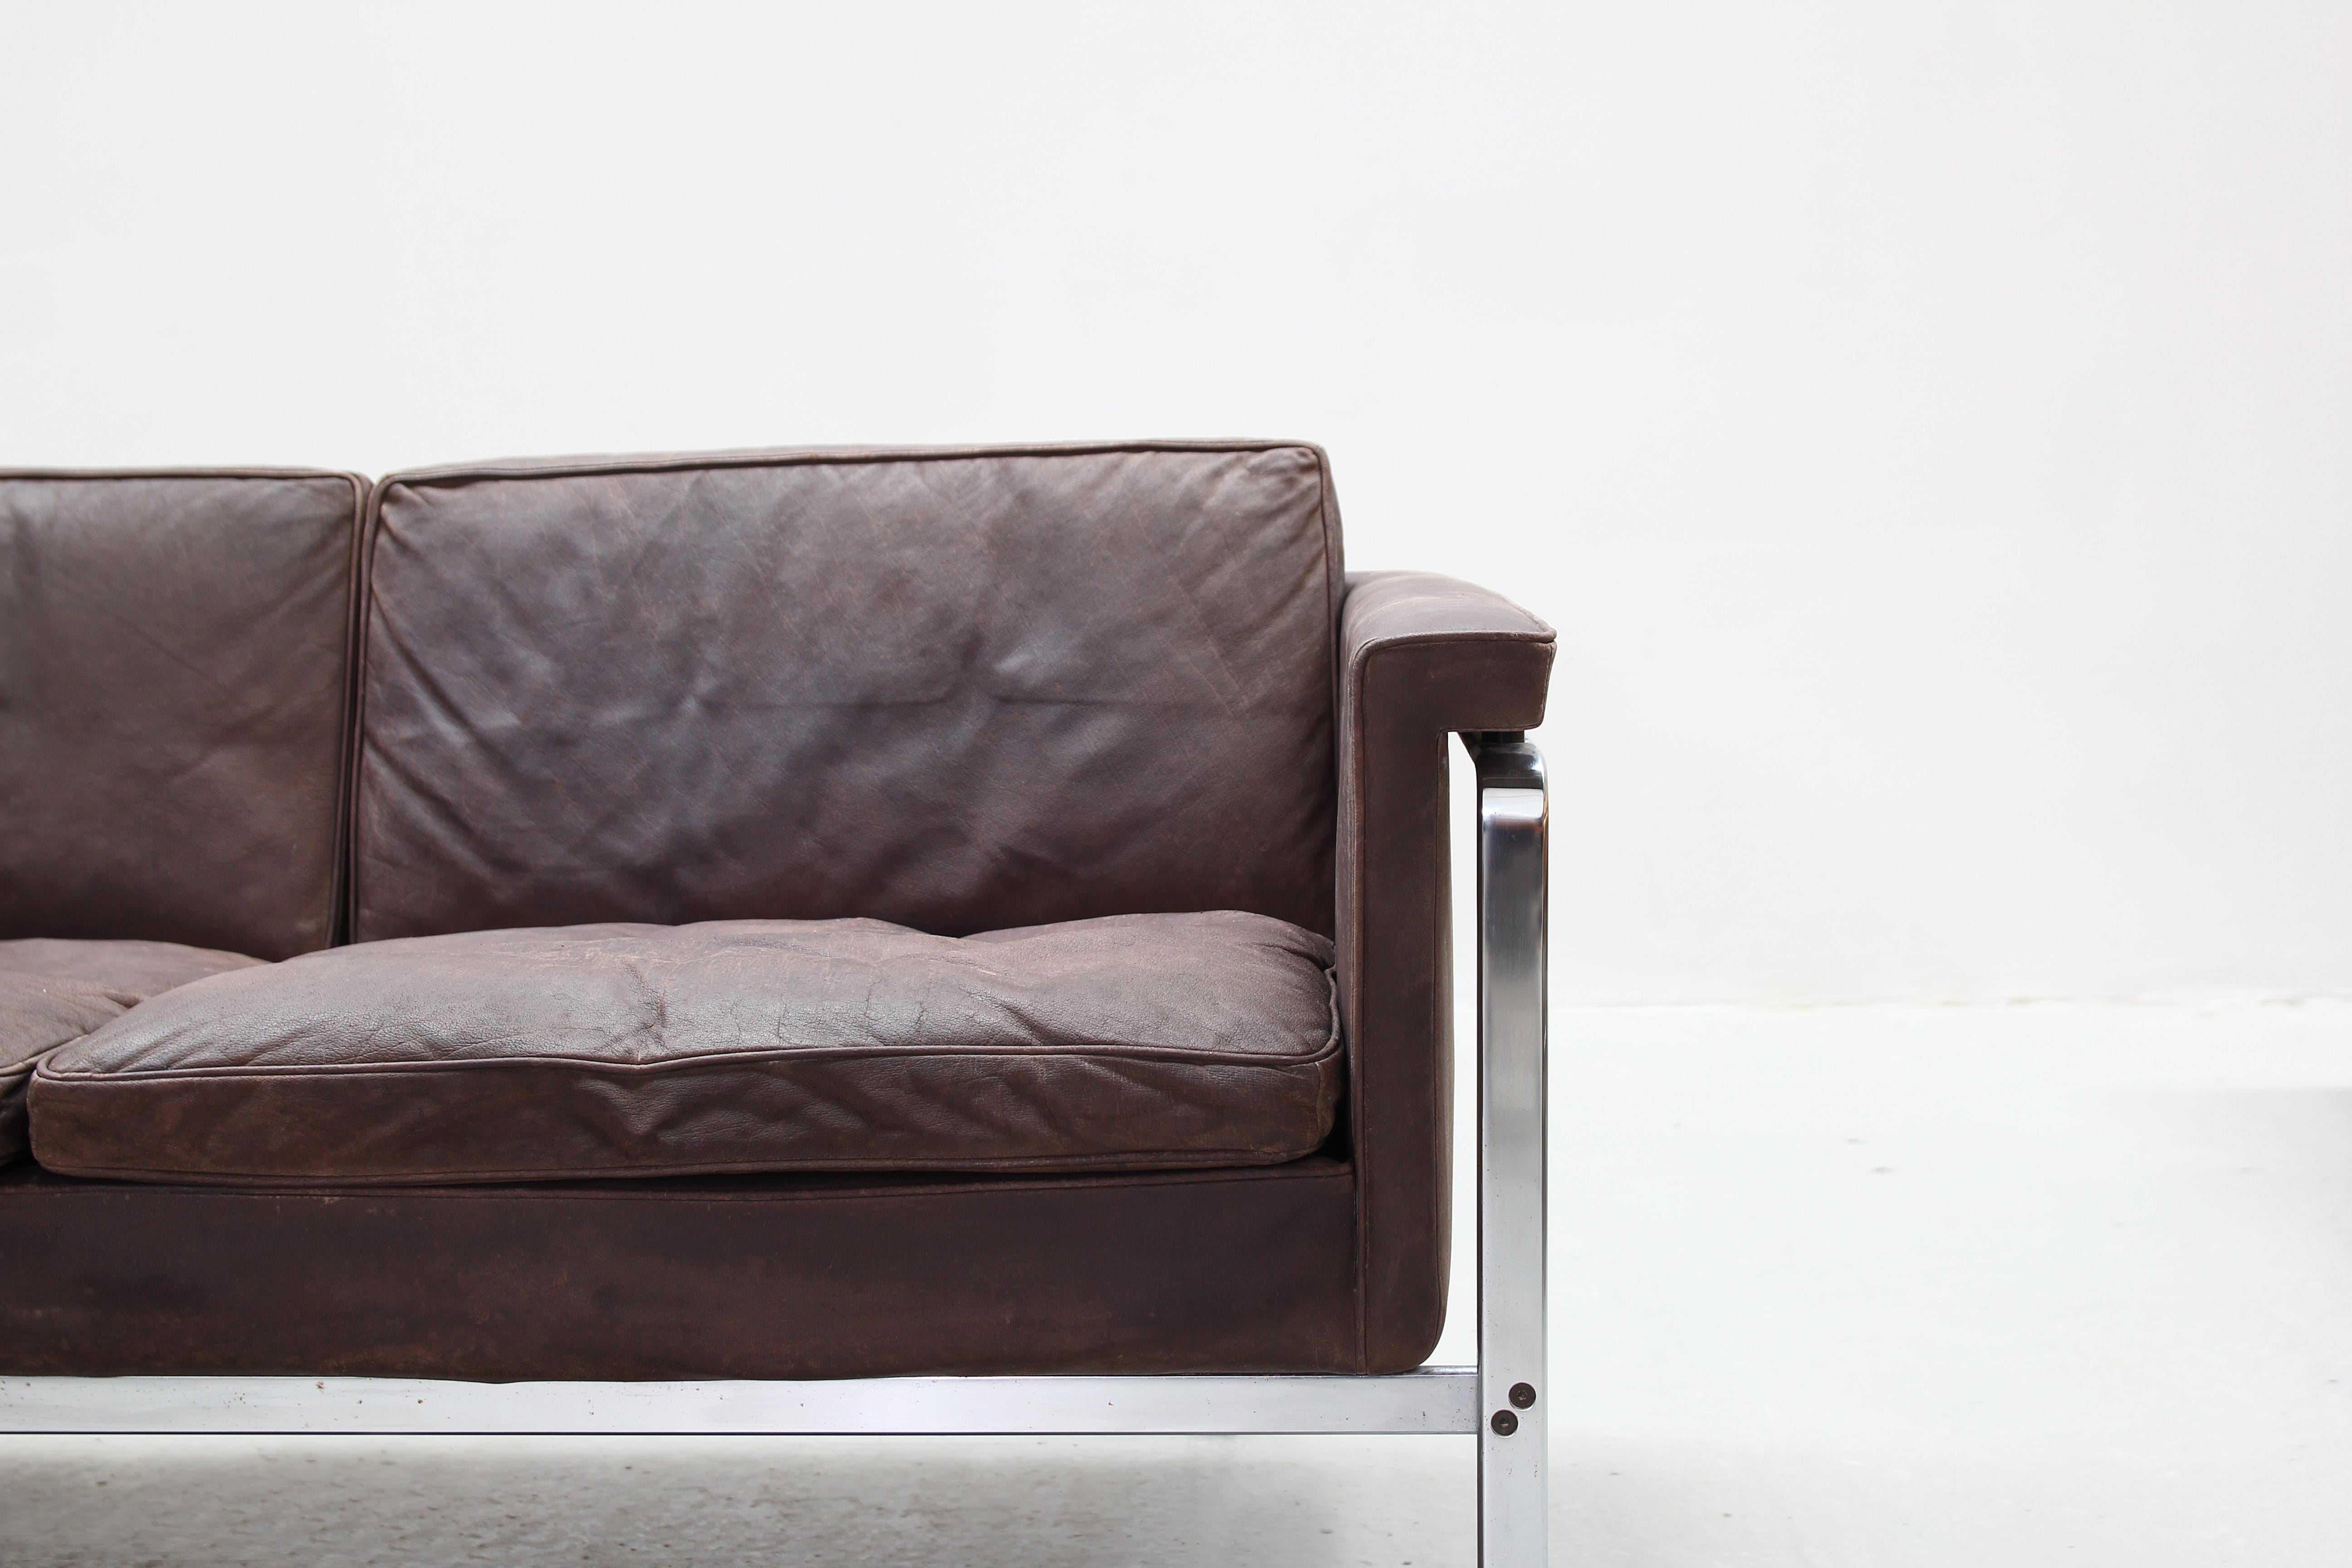 Two-Seat Sofa by Horst Bruning for Alfred Kill International Leather, 1968 For Sale 1